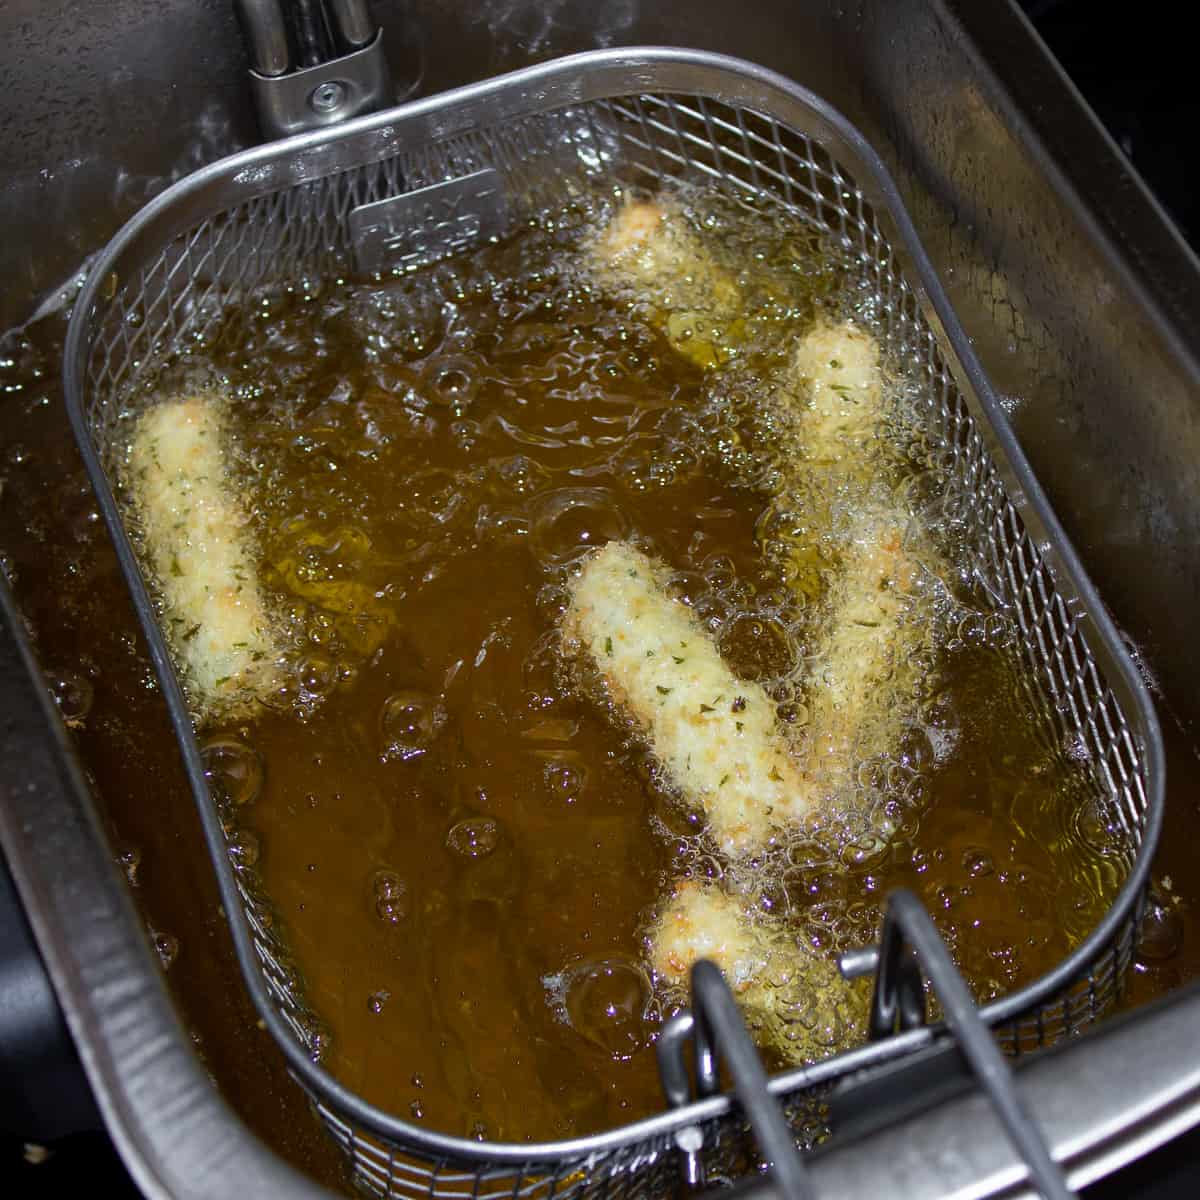 A deep fryer with bread sticks in the hot oil